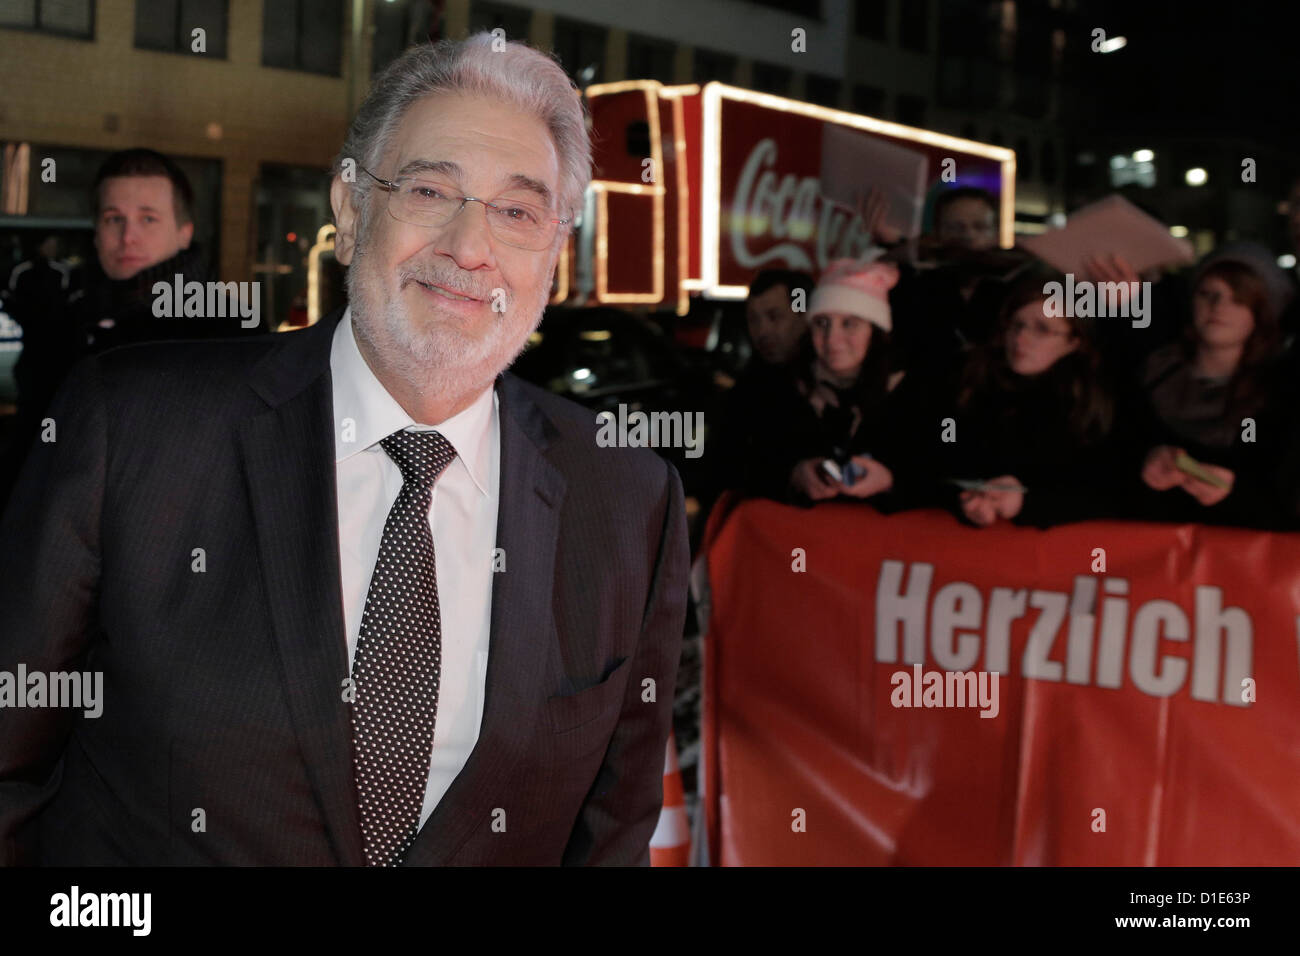 Placido Domingo poses at the charity event "Ein Herz fuer Kinder" ("A Heart for children") in Berlin on 15 December 2012. Stock Photo